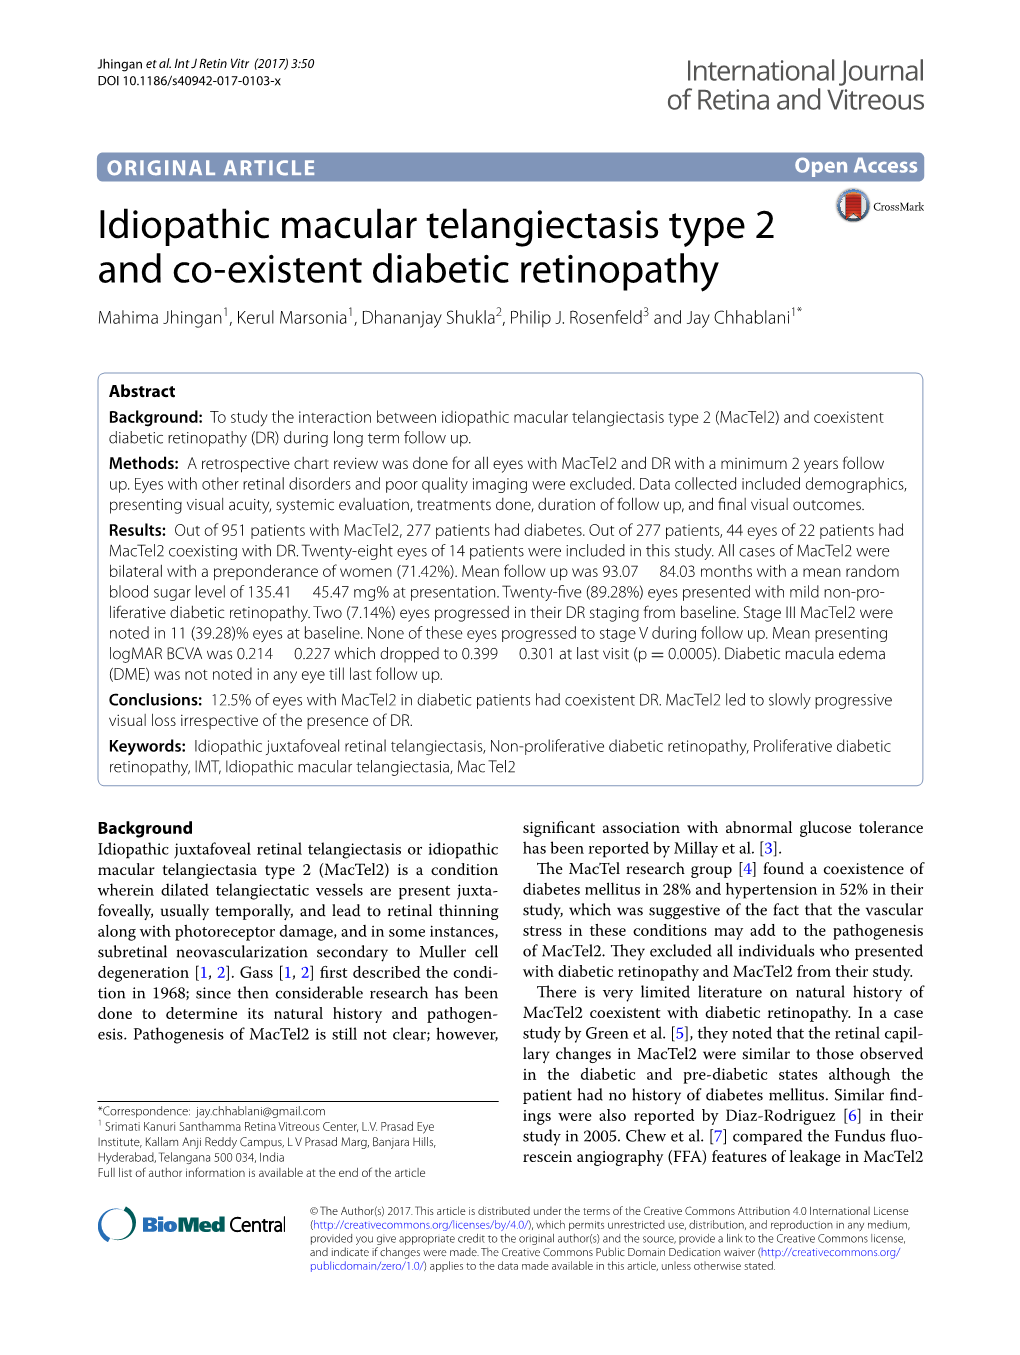 Idiopathic Macular Telangiectasis Type 2 and Co-Existent Diabetic Retinopathy